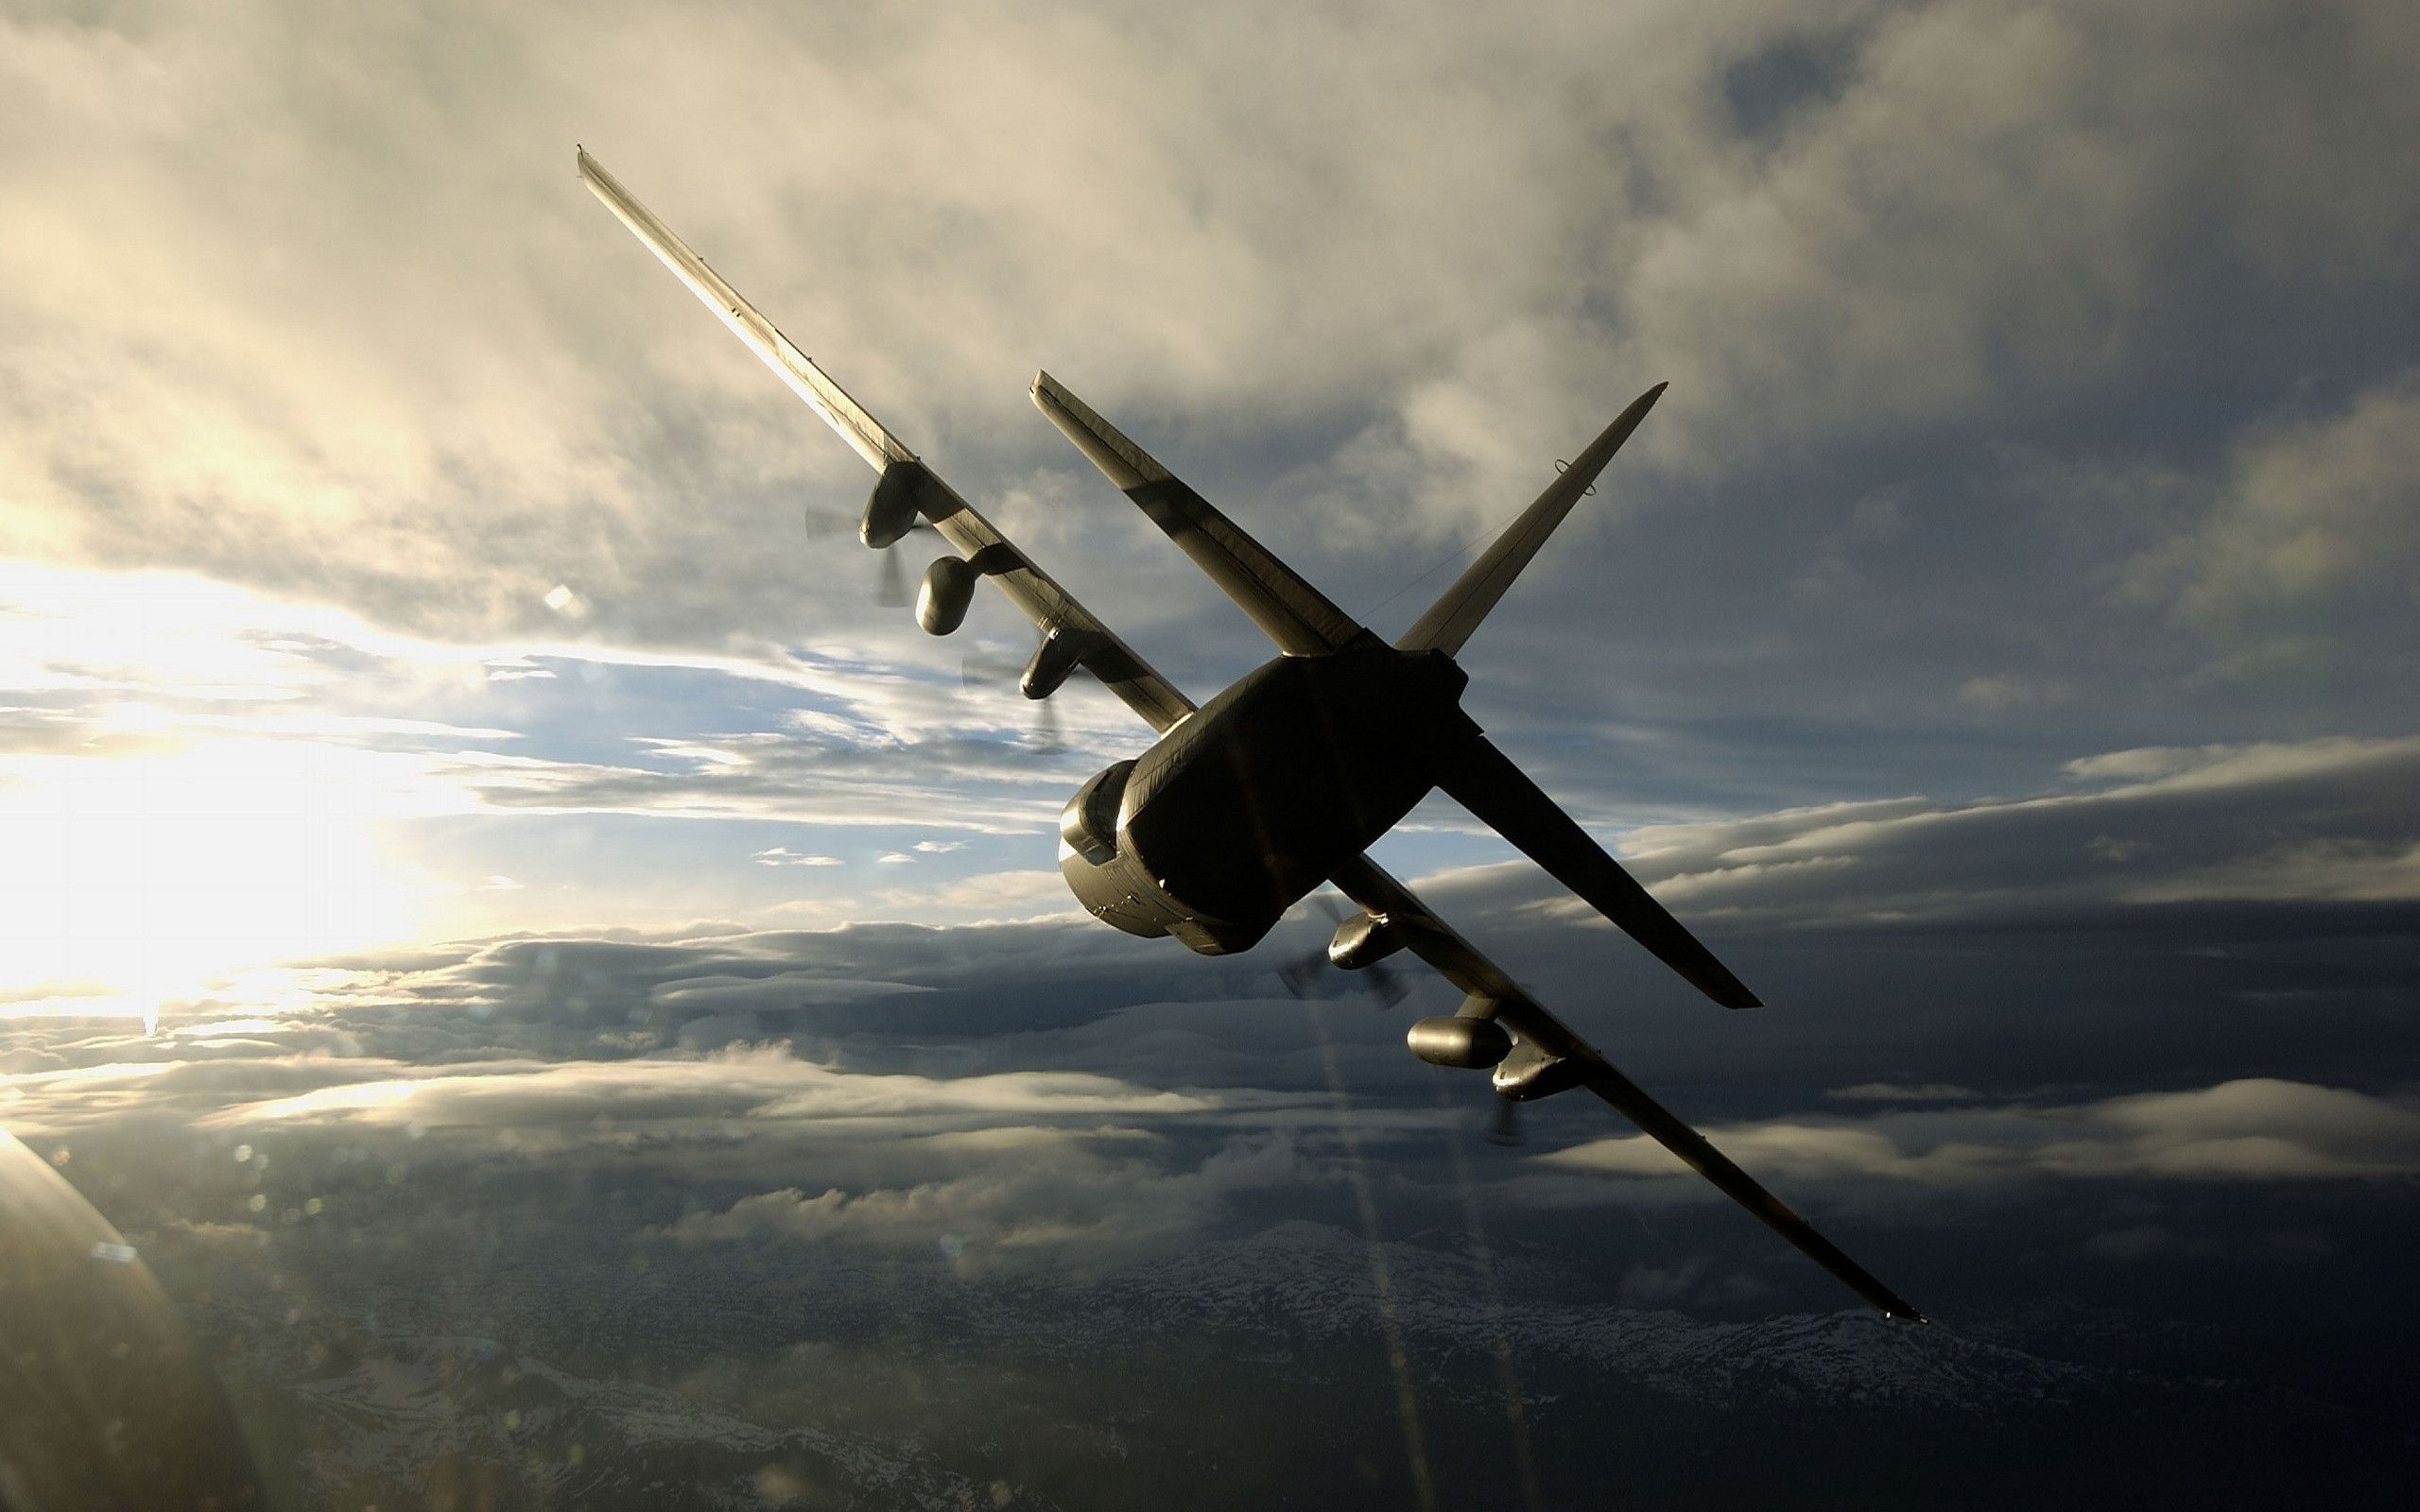 C-130 Wallpapers - Top Free C-130 Backgrounds 2560x1600